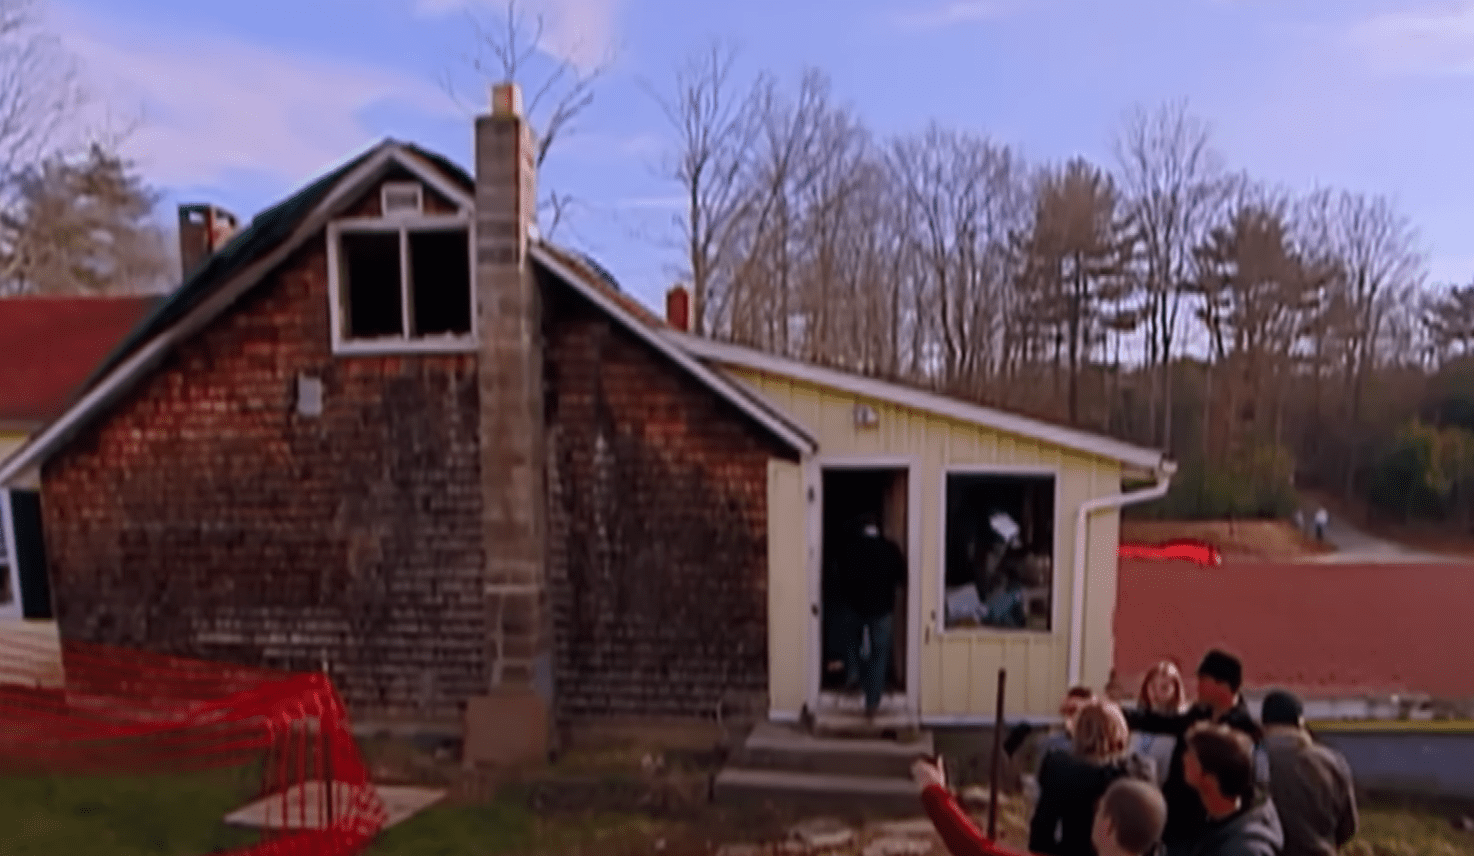 The Girard family home after a devastating fire. | Source: youtube.com/ExtremeMakeoverHomeEdition